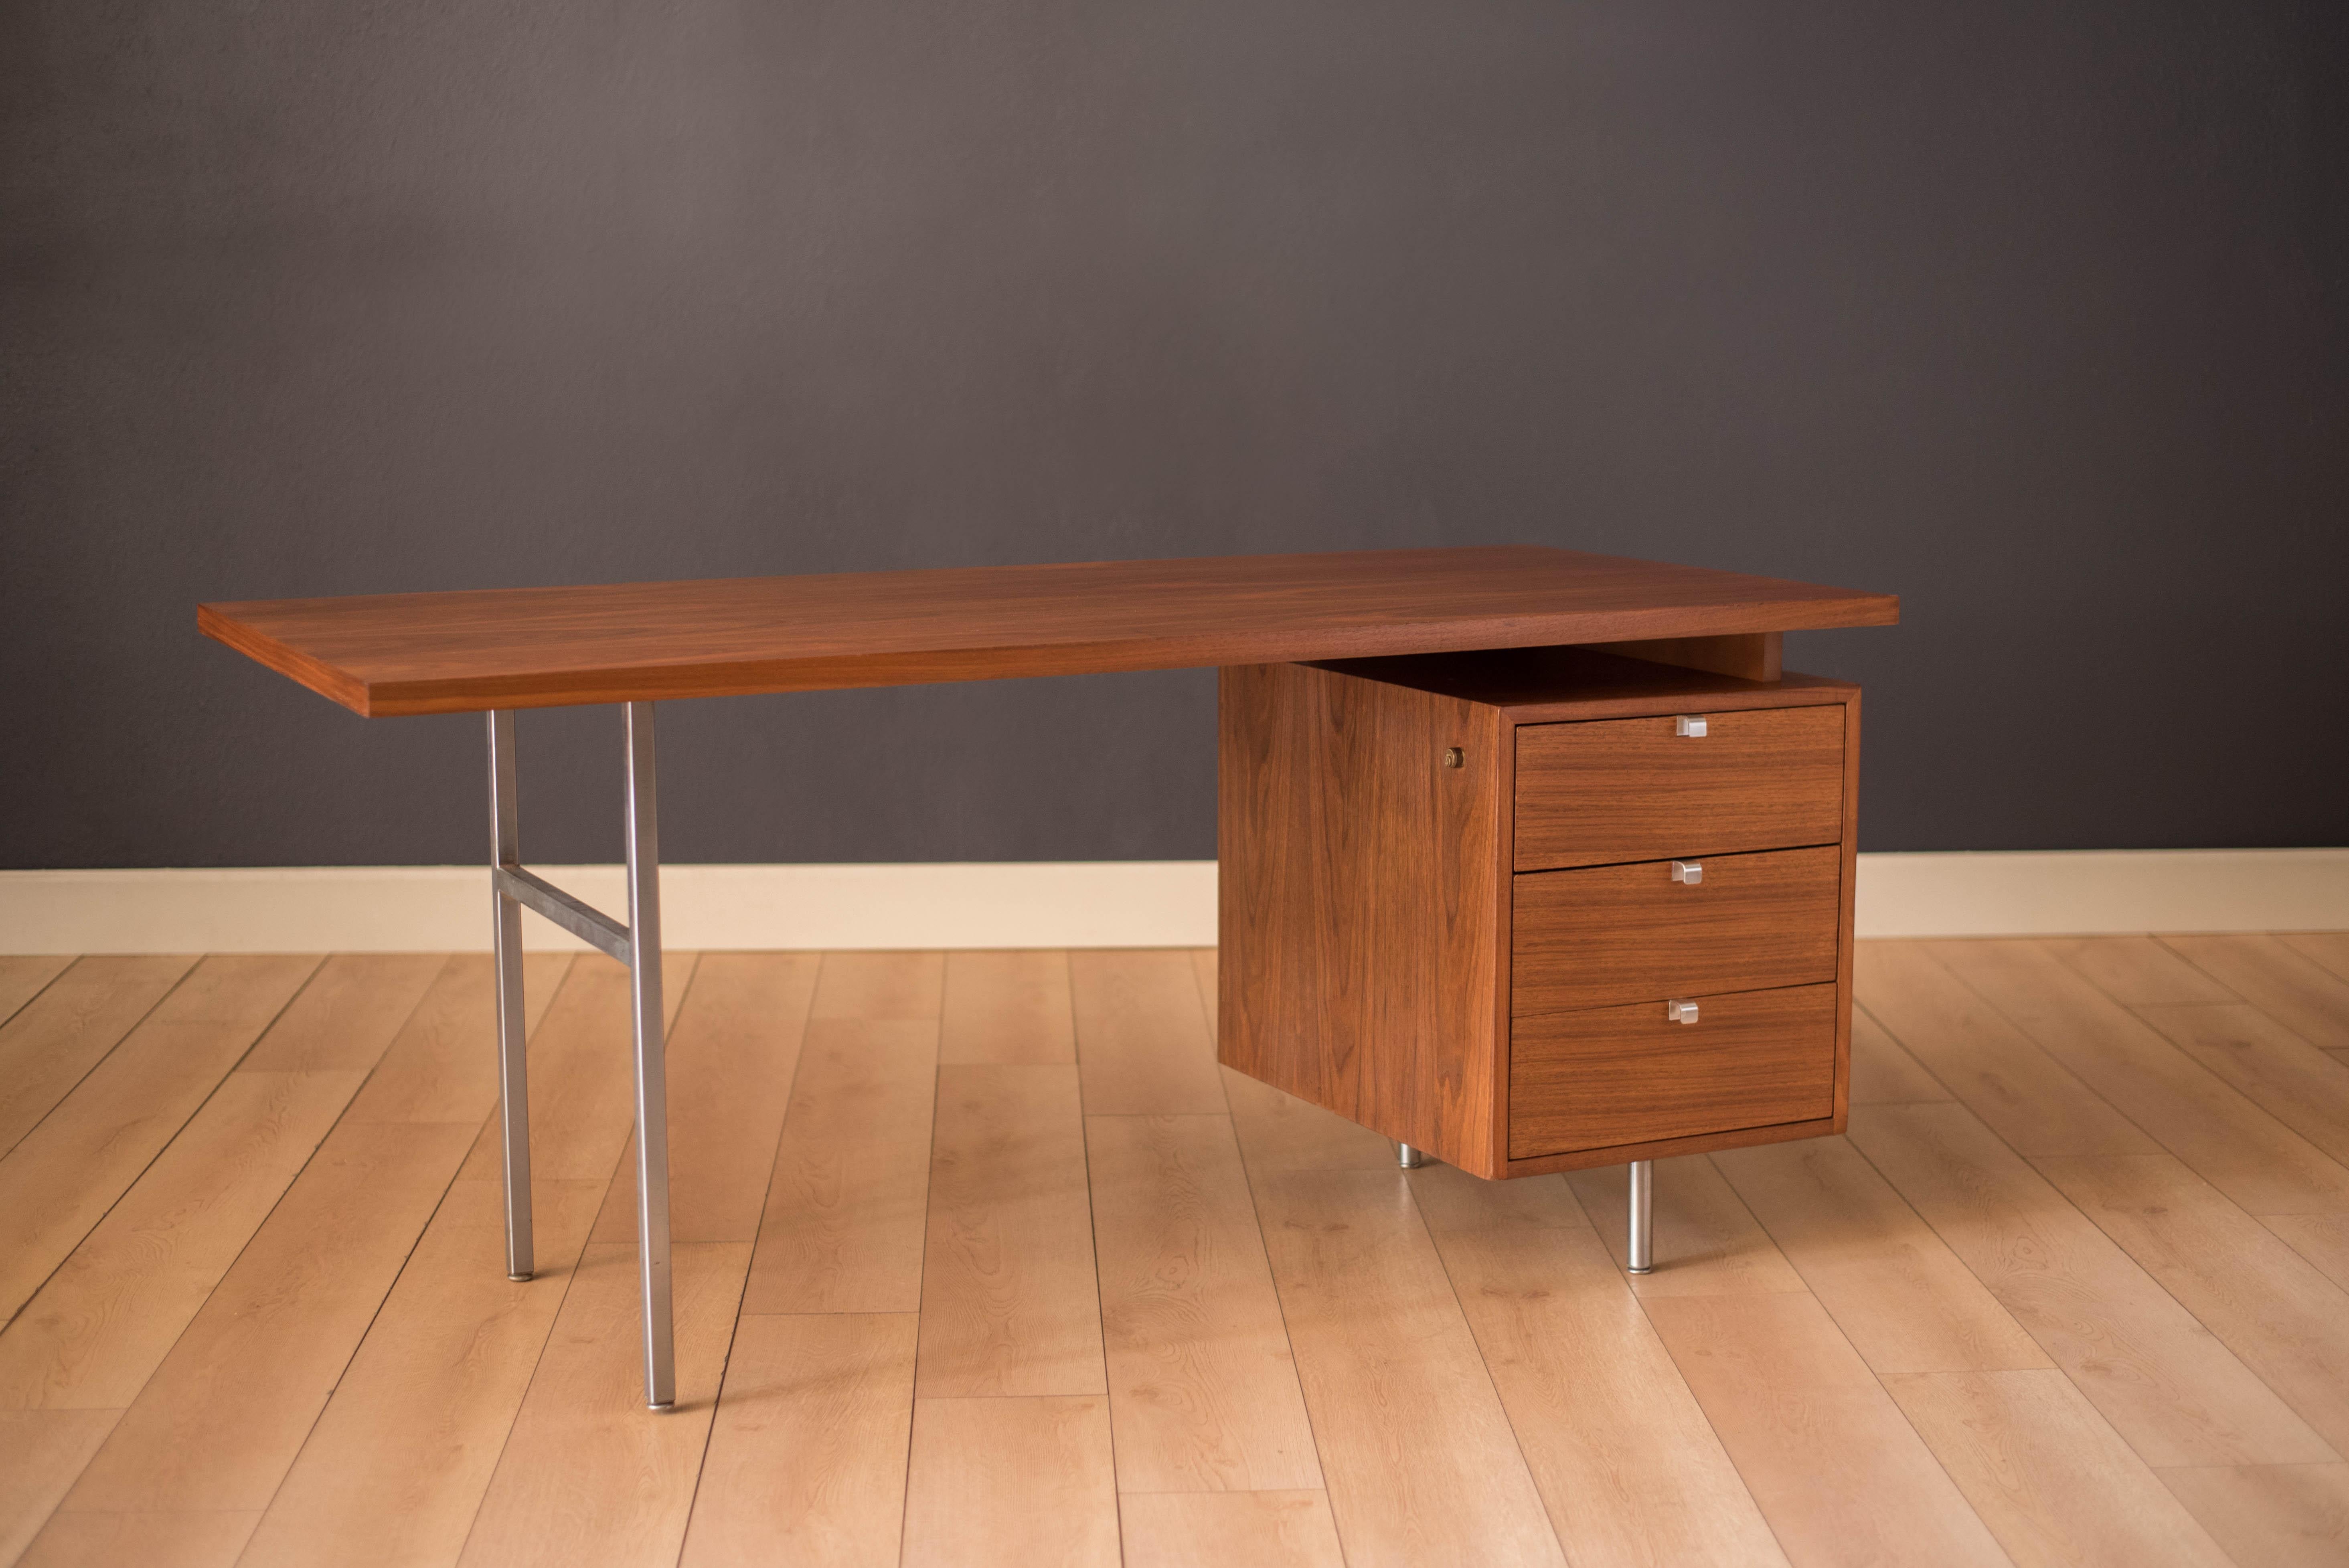 Vintage executive desk designed by George Nelson for Herman Miller, circa 1960s. This piece features a floating walnut top that offers plenty of display space supported by steel legs. Includes a bank of three storage drawers accented with brushed